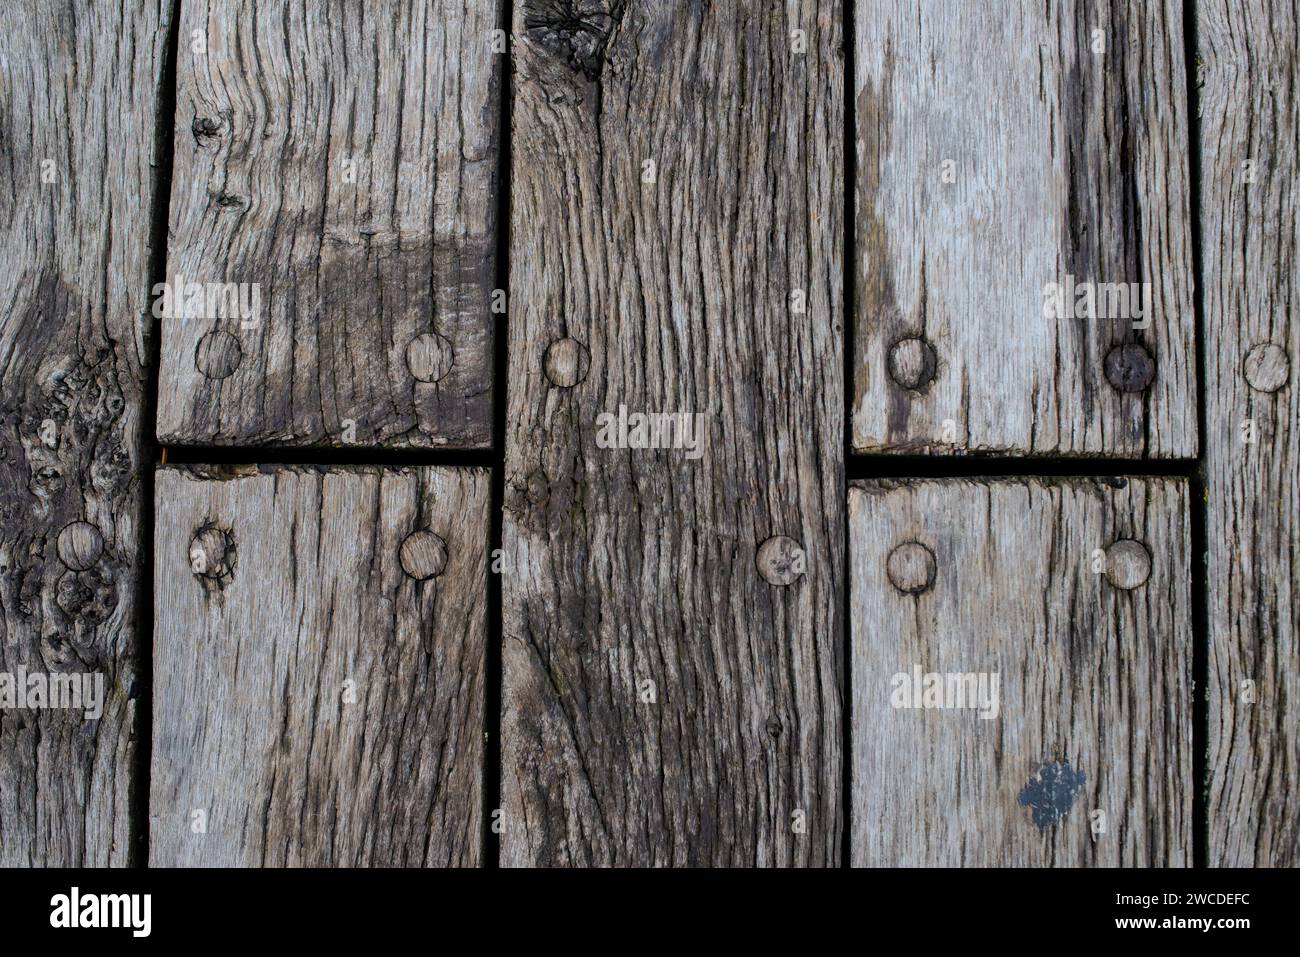 An aged wooden fence displaying a series of nails, some of which are absent Stock Photo